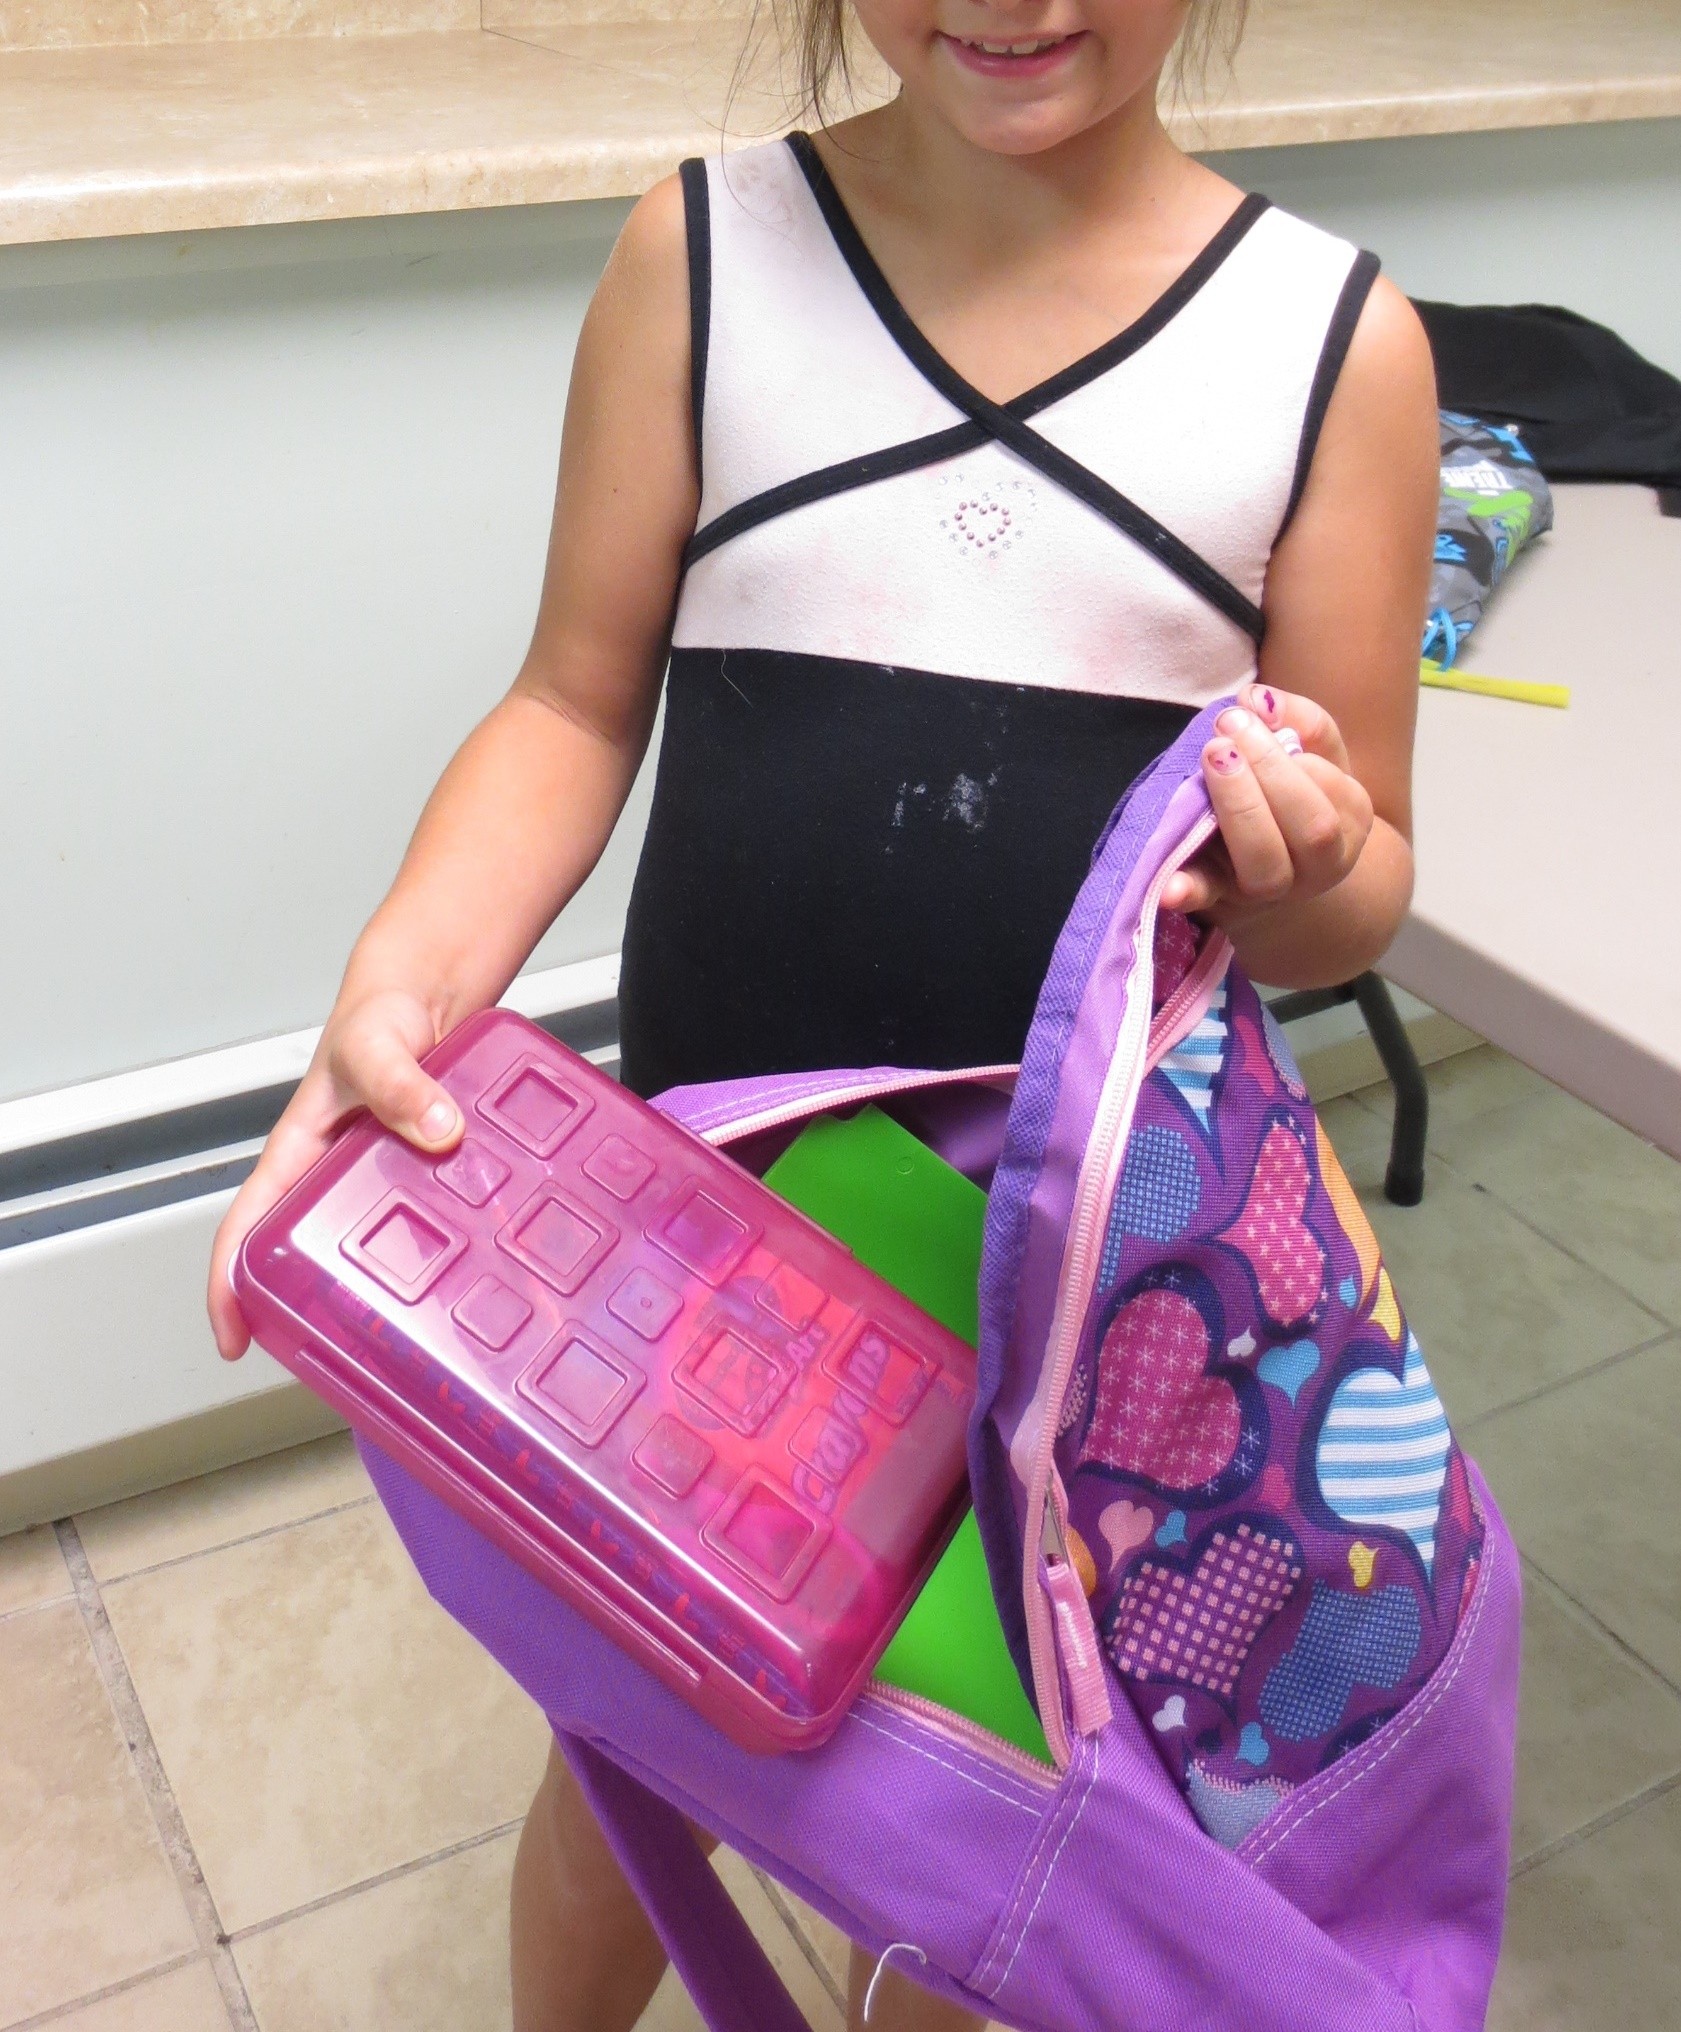 Trinity Brannock looks at the pencil box in her backpack cropped